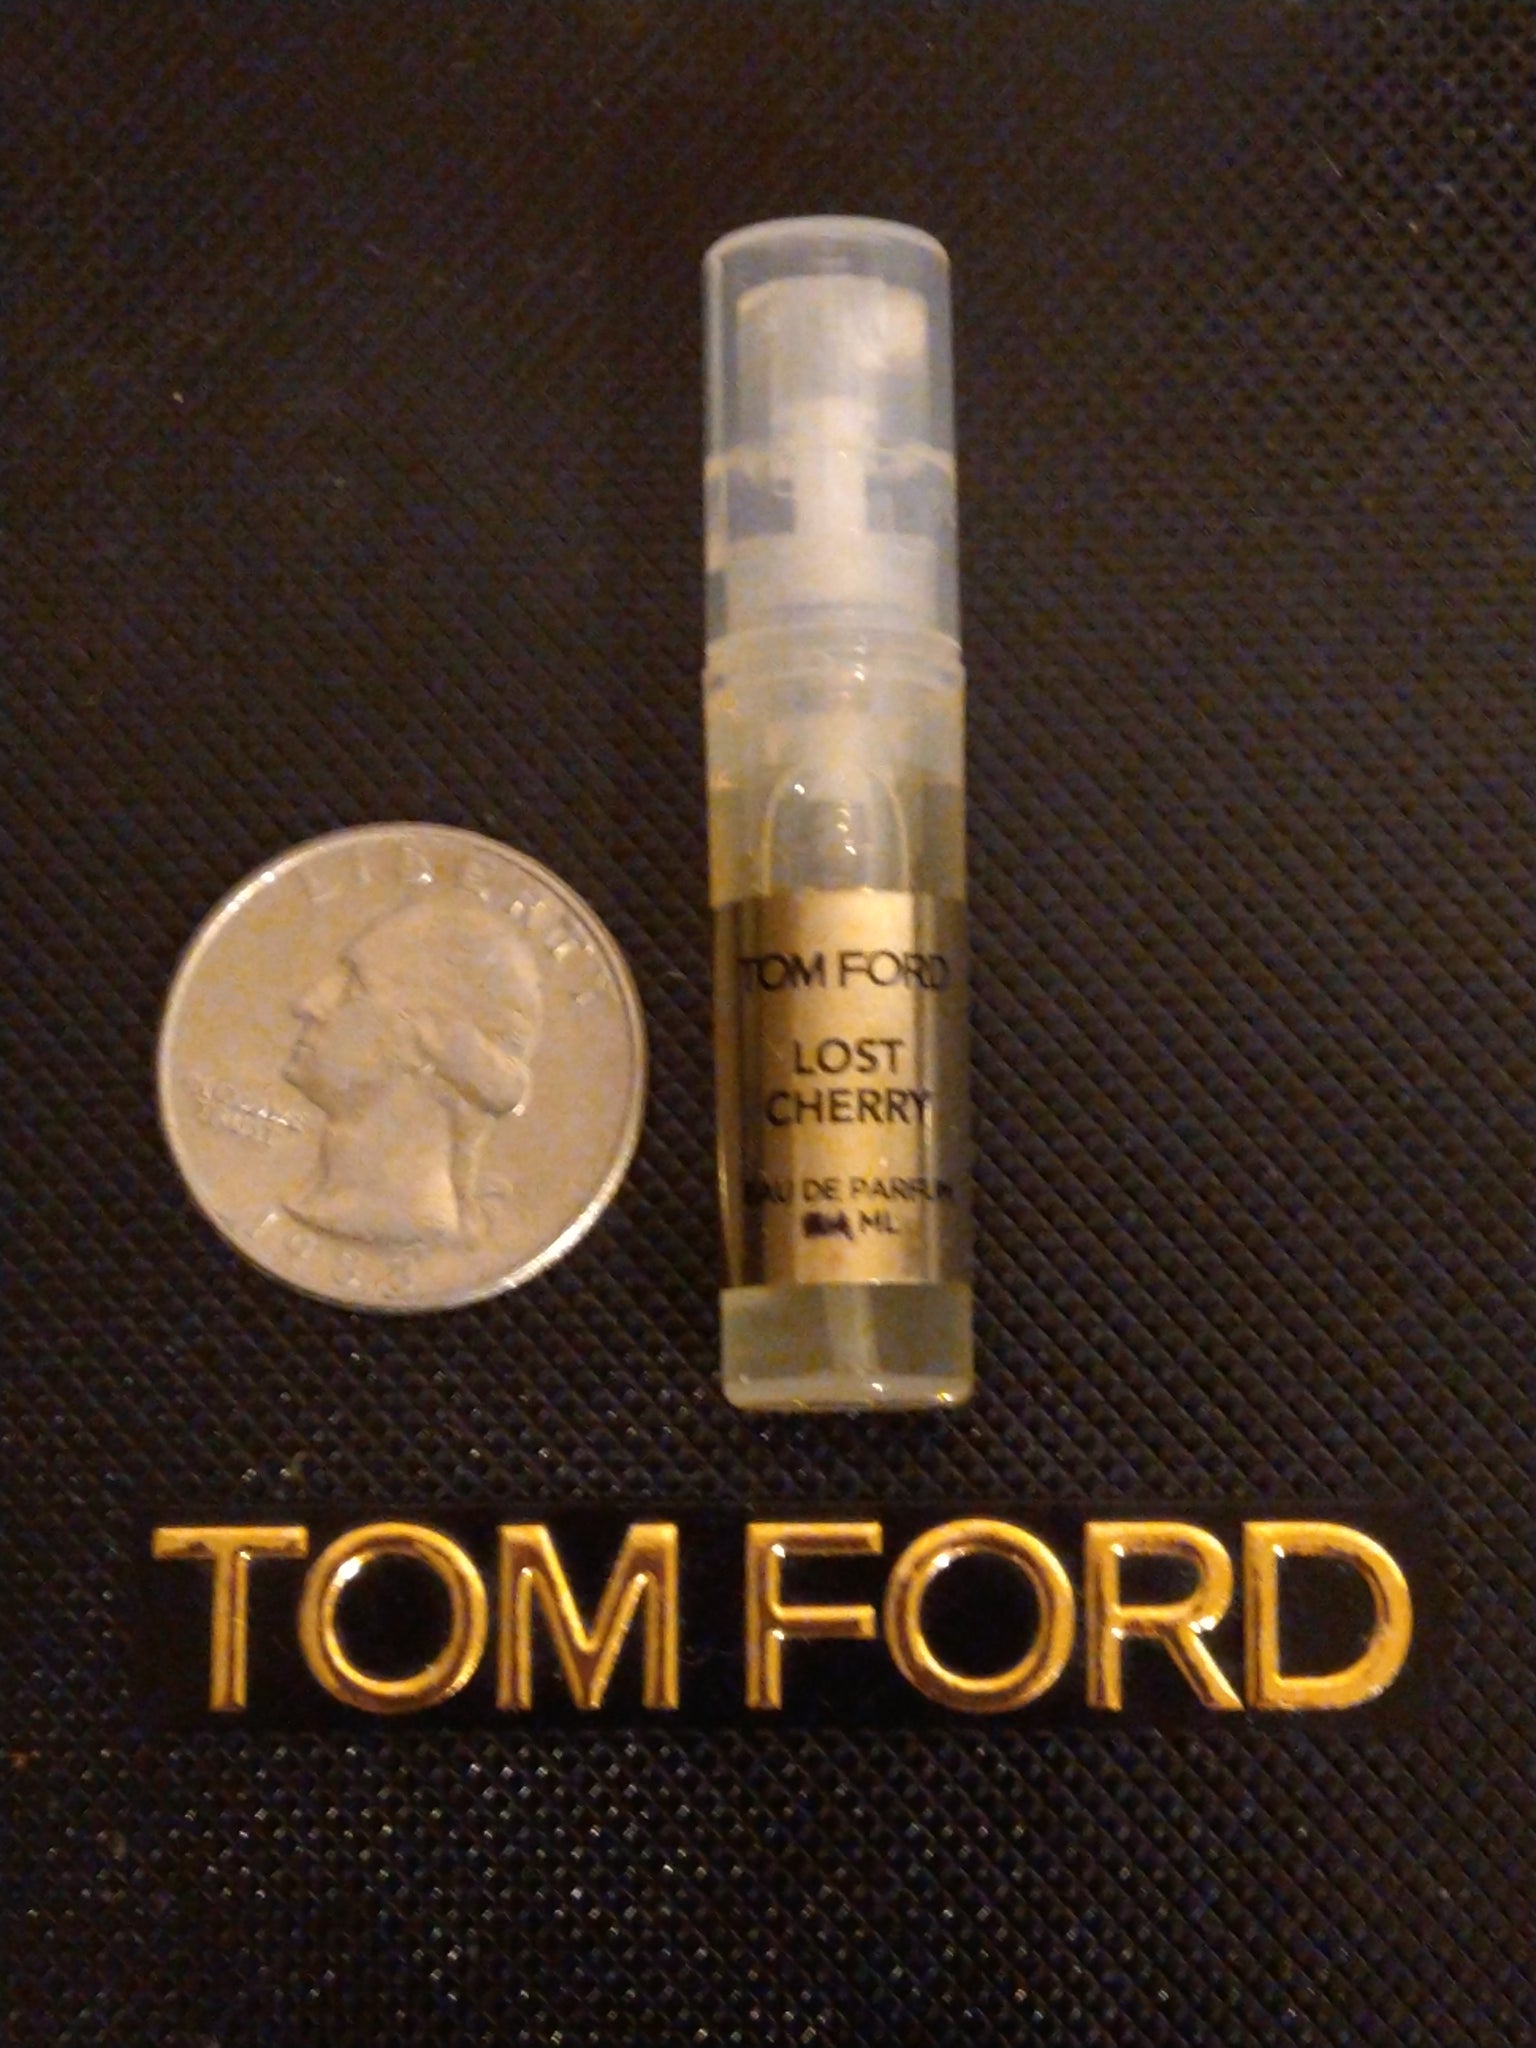 Lost Cherry Authentic Tom Ford Perfume Samples – TomFordPerfumeSamples